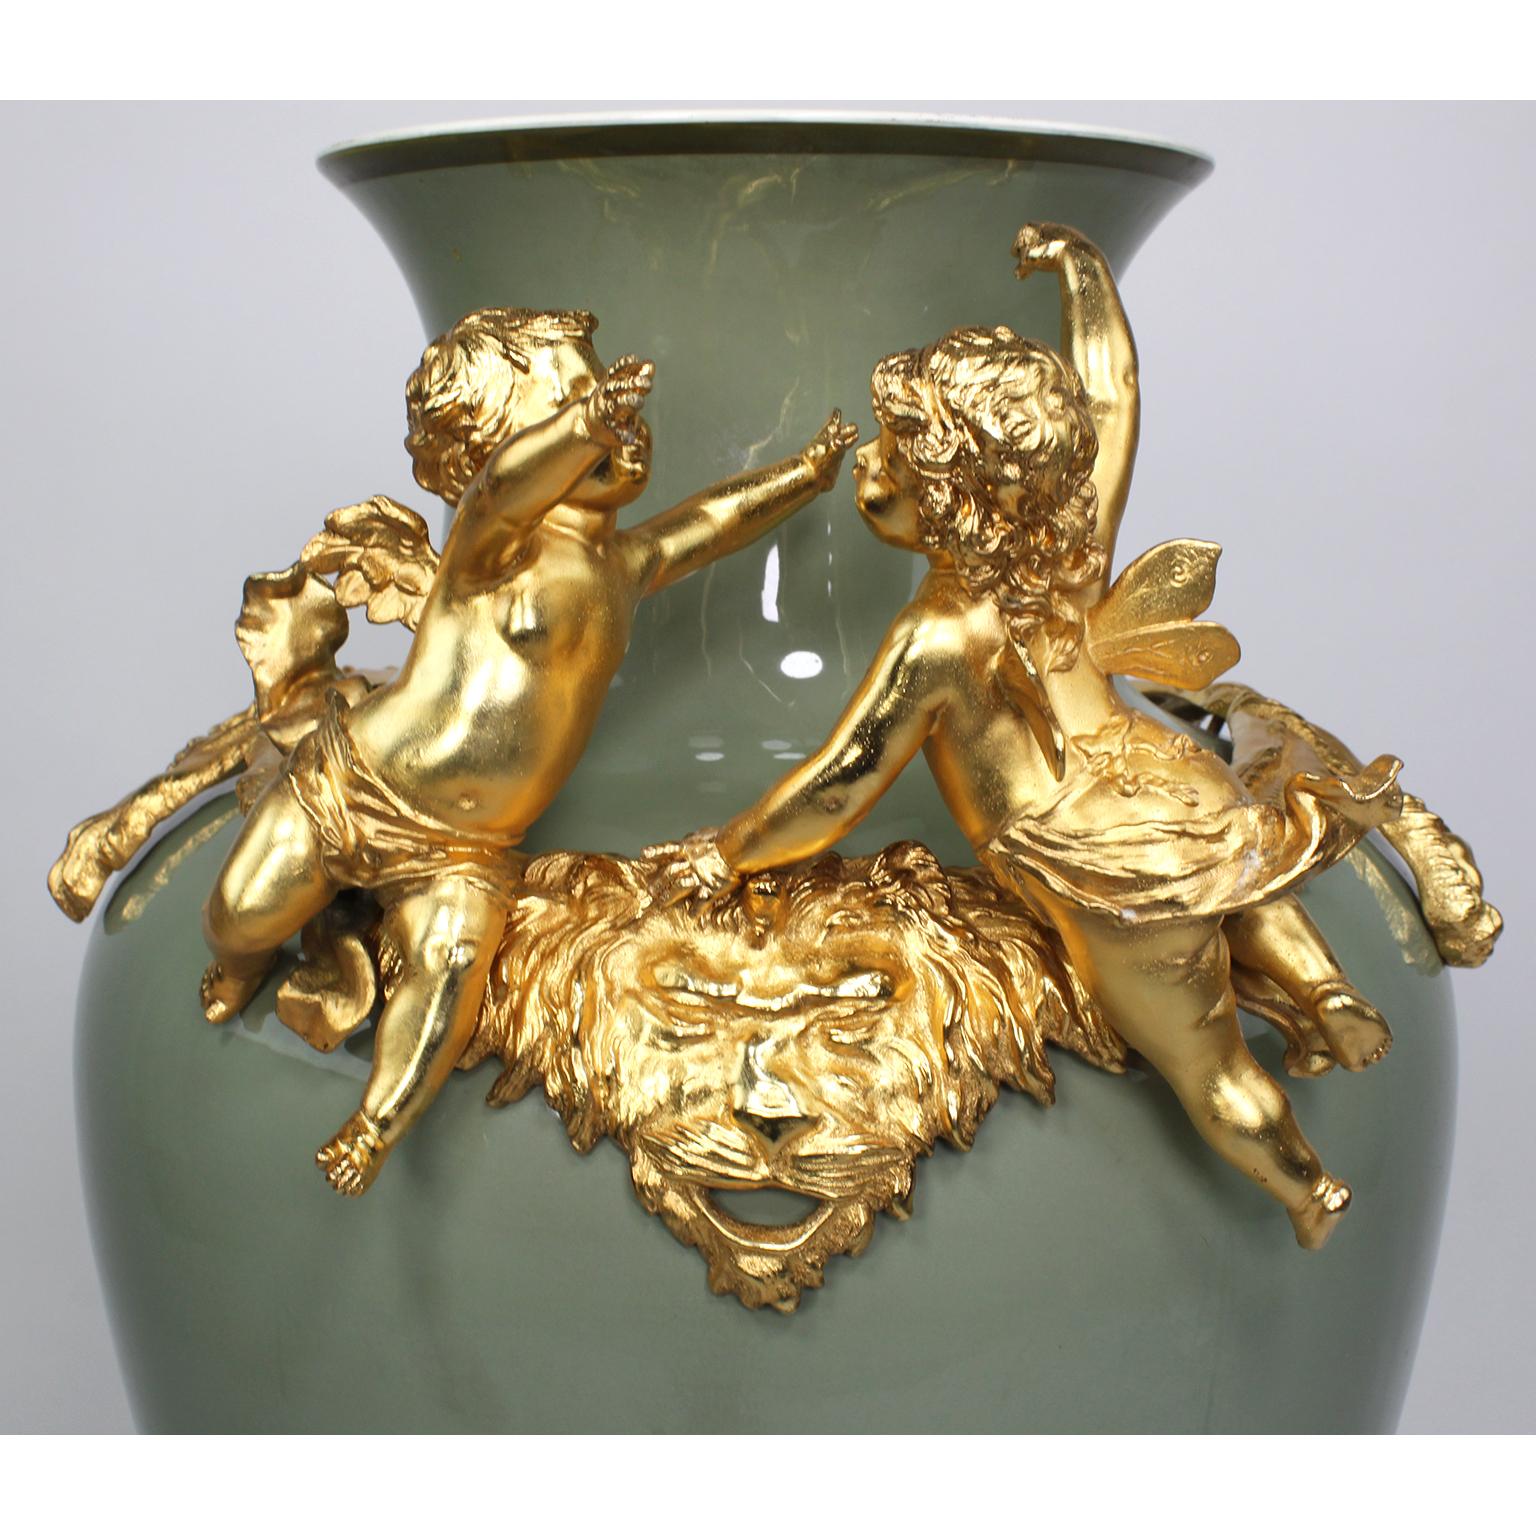 Early 20th Century Continental 19th-20th Century Porcelain and Gilt Metal Mounted Vase with Cherubs